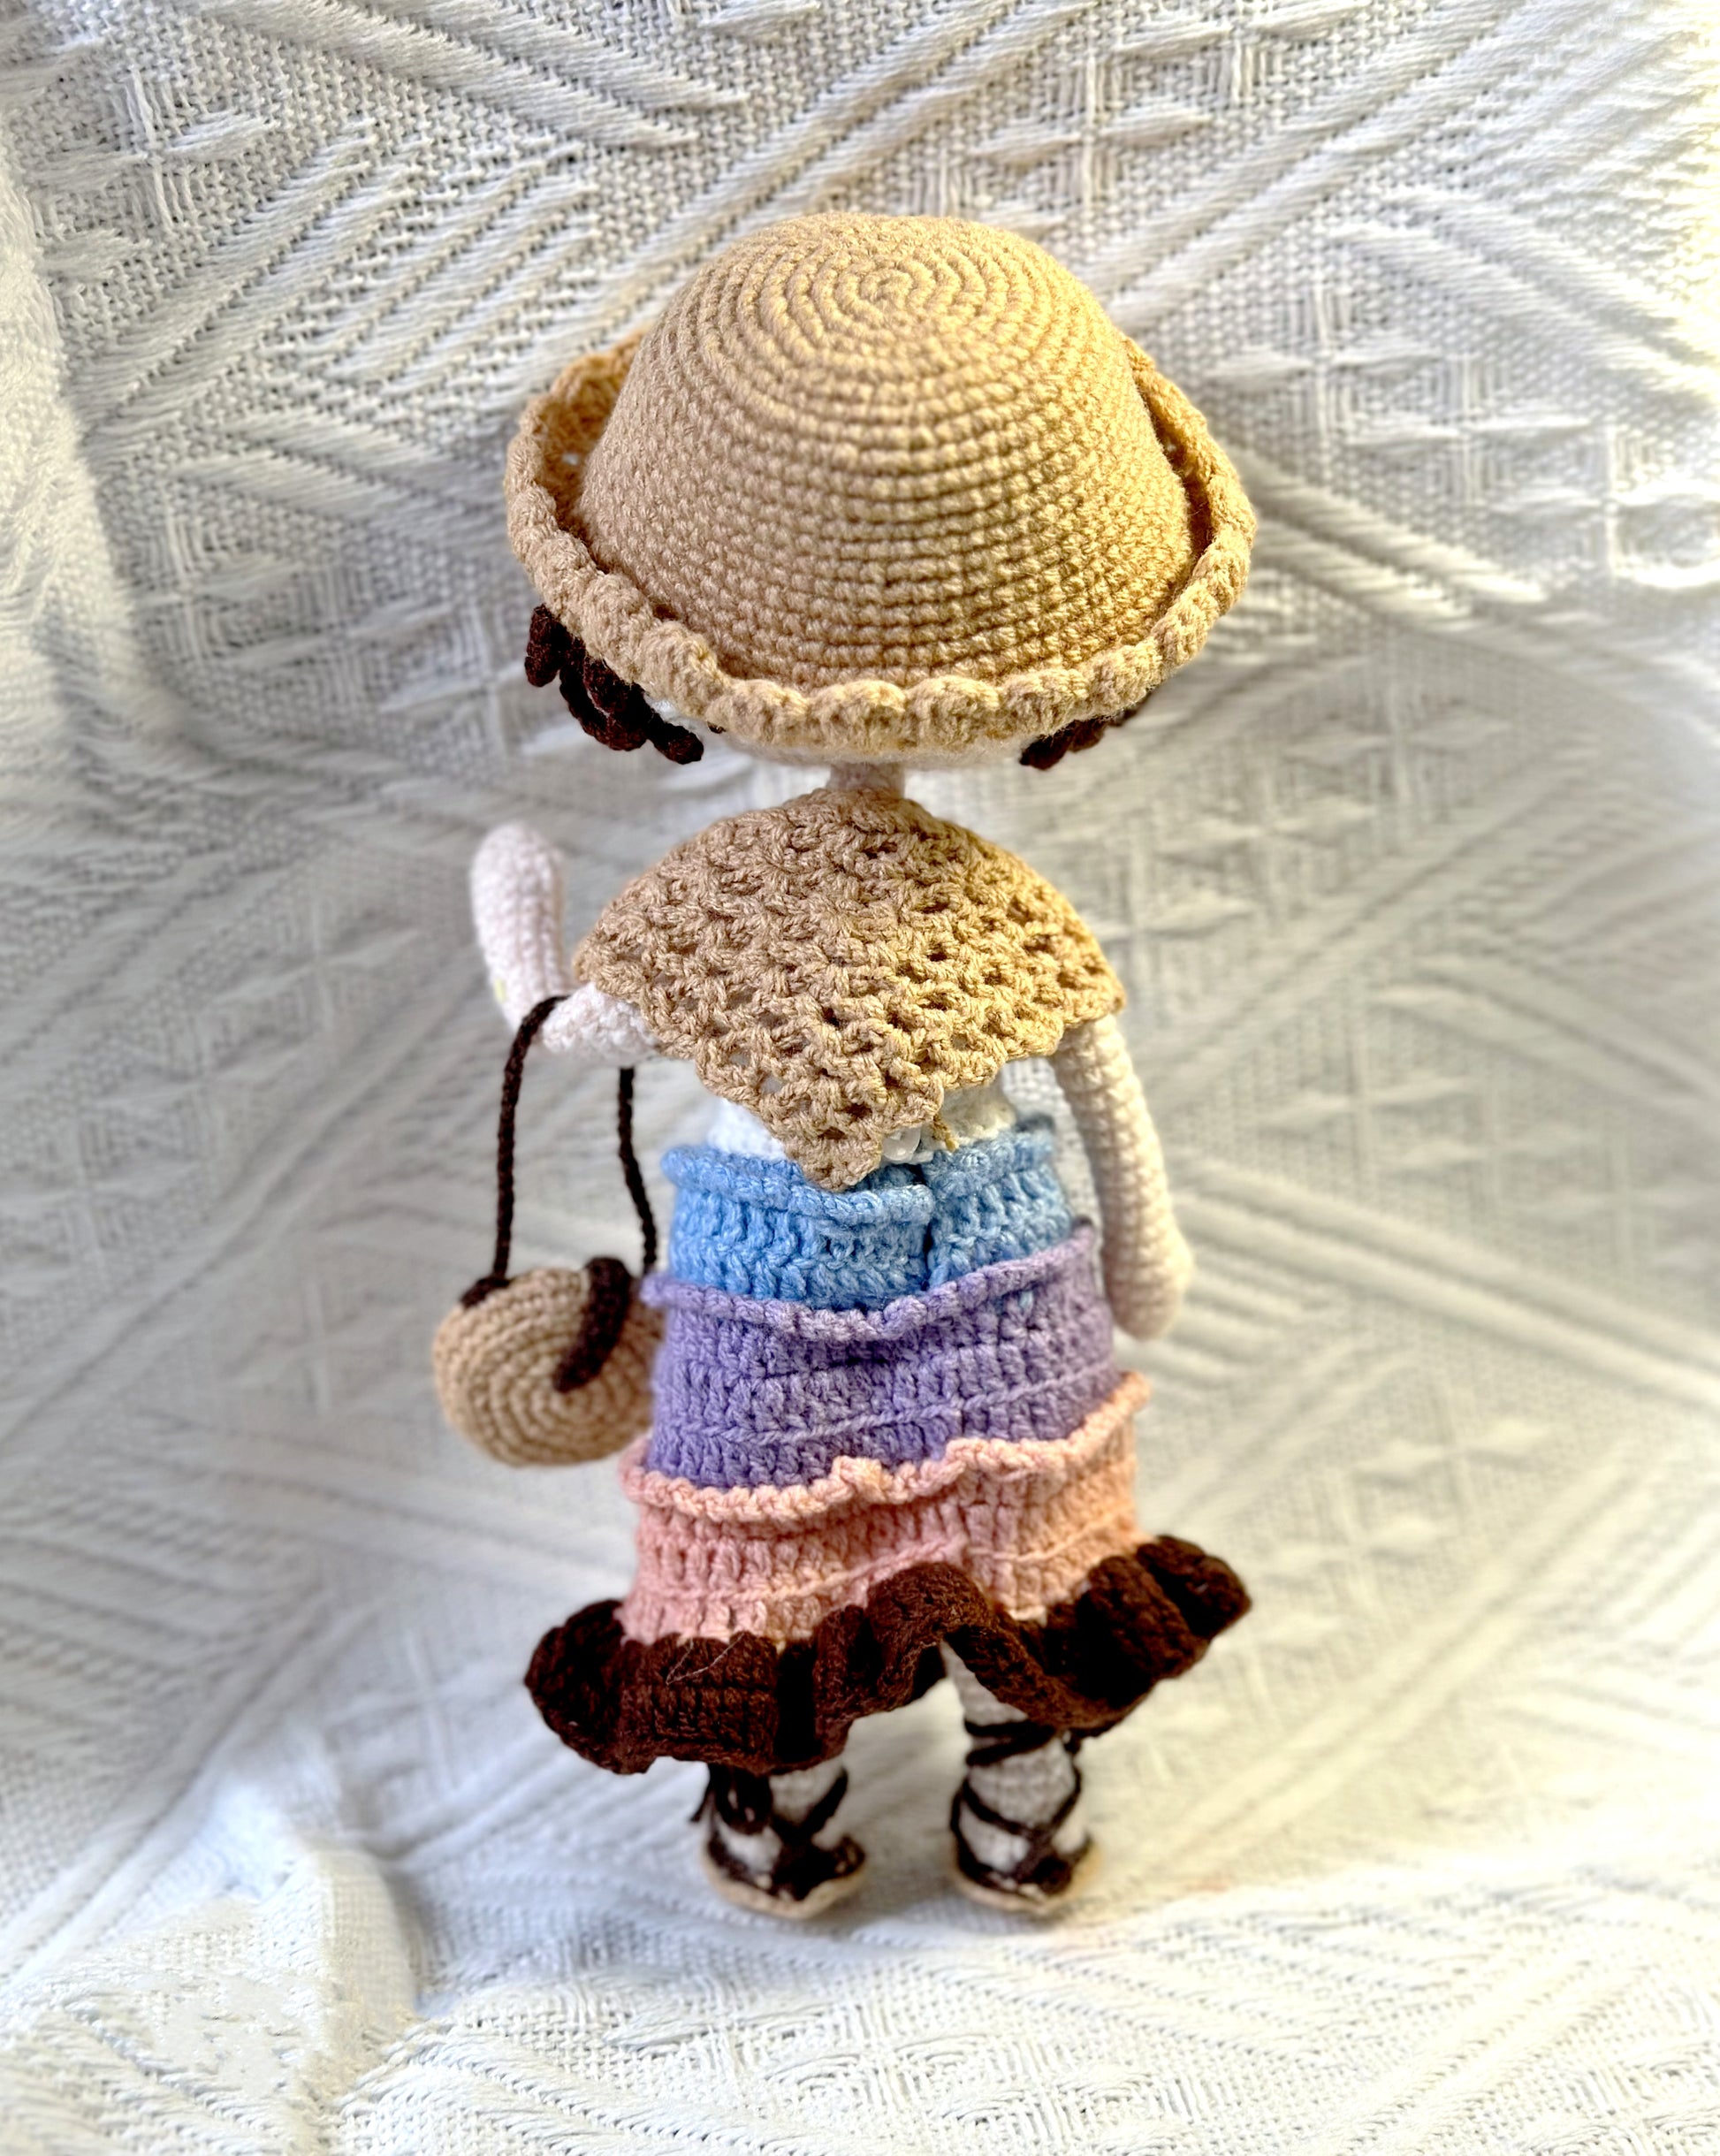 Custom crochet girl doll ornaments for baby showers and events